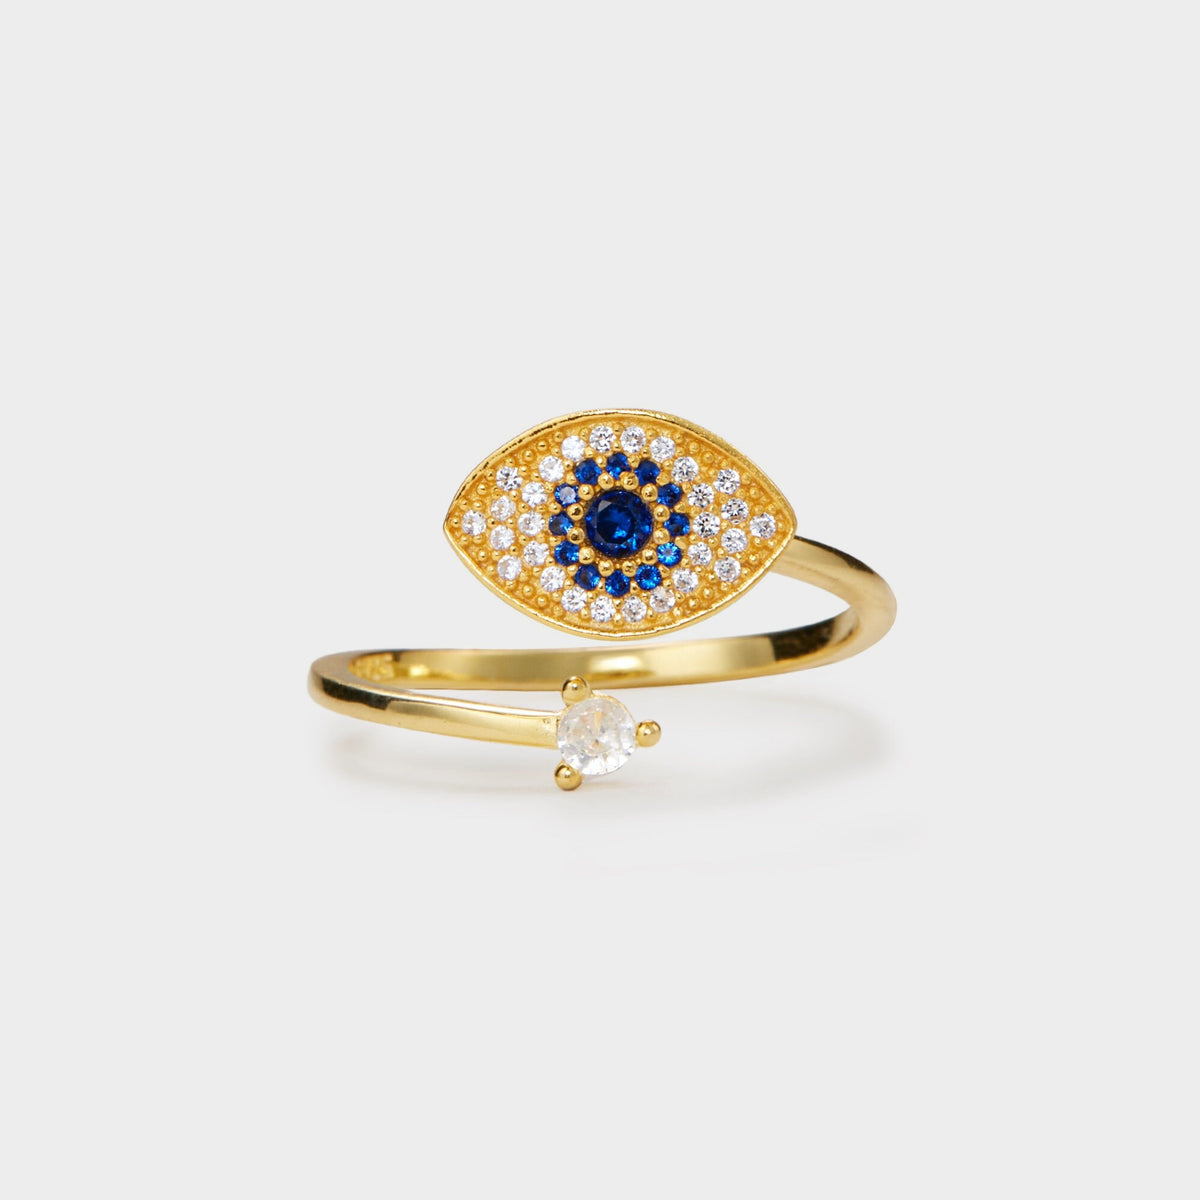 Forever Safeguard - Gold Navy Enamel Evil Eye Ring, Fair Trade Product, with Authentic Gemstones, Blessed by A Singing Bowl